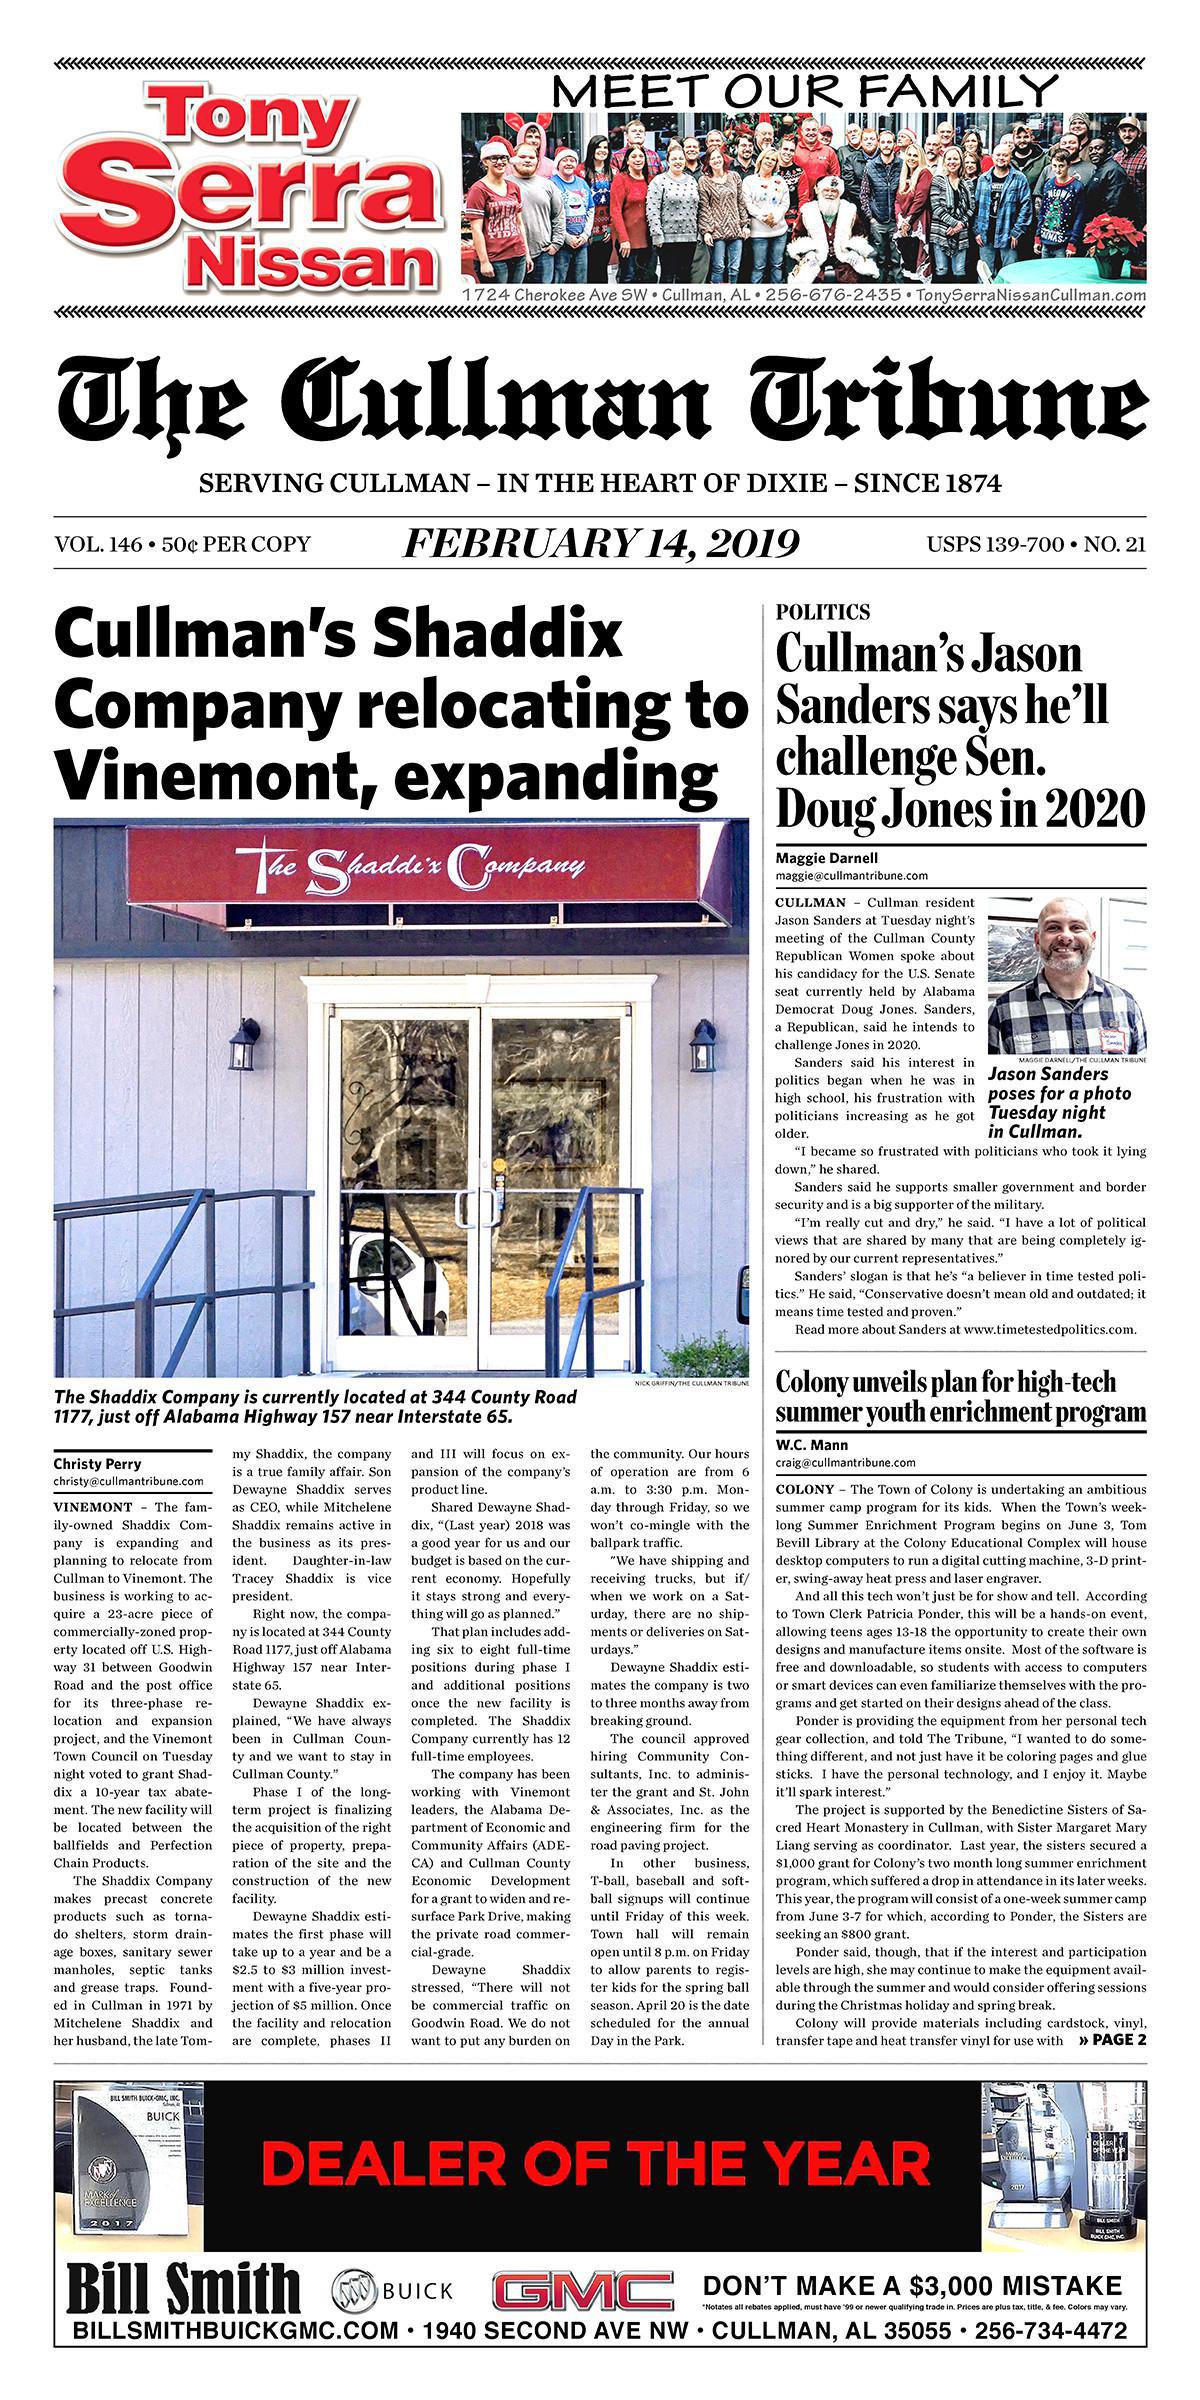 Good Morning Cullman! The 02-14-2019 edition of the Cullman Tribune is now ready to view